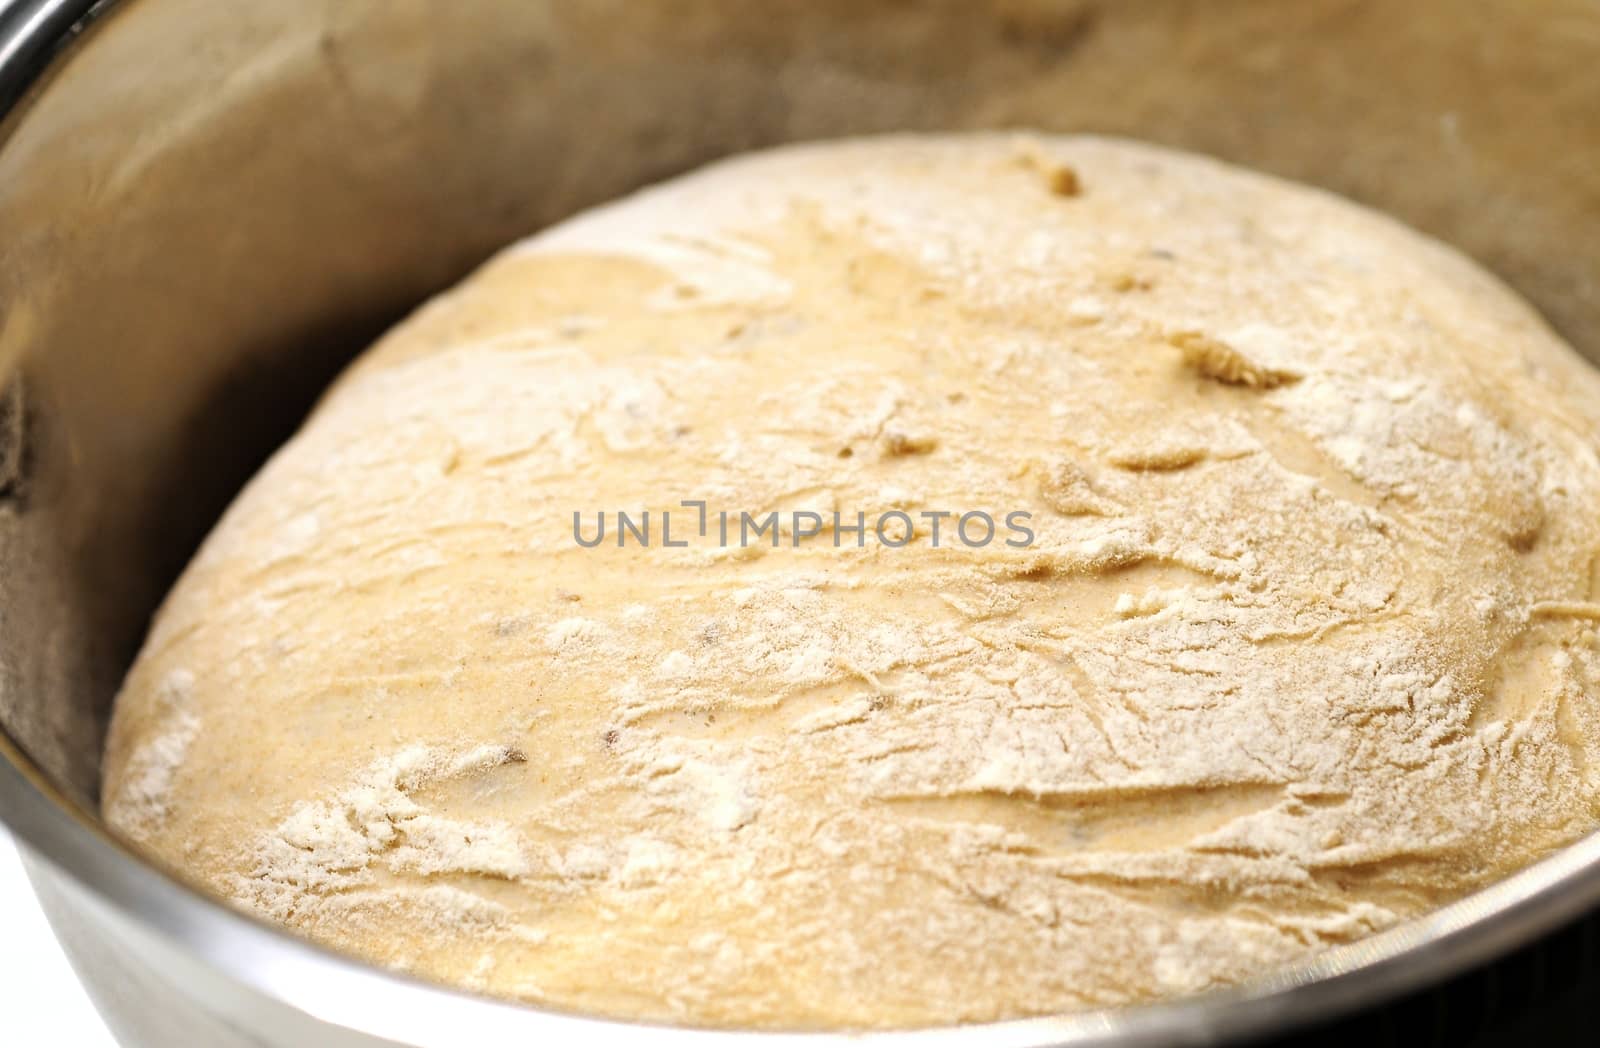 Yeast dough in bowl by hamik